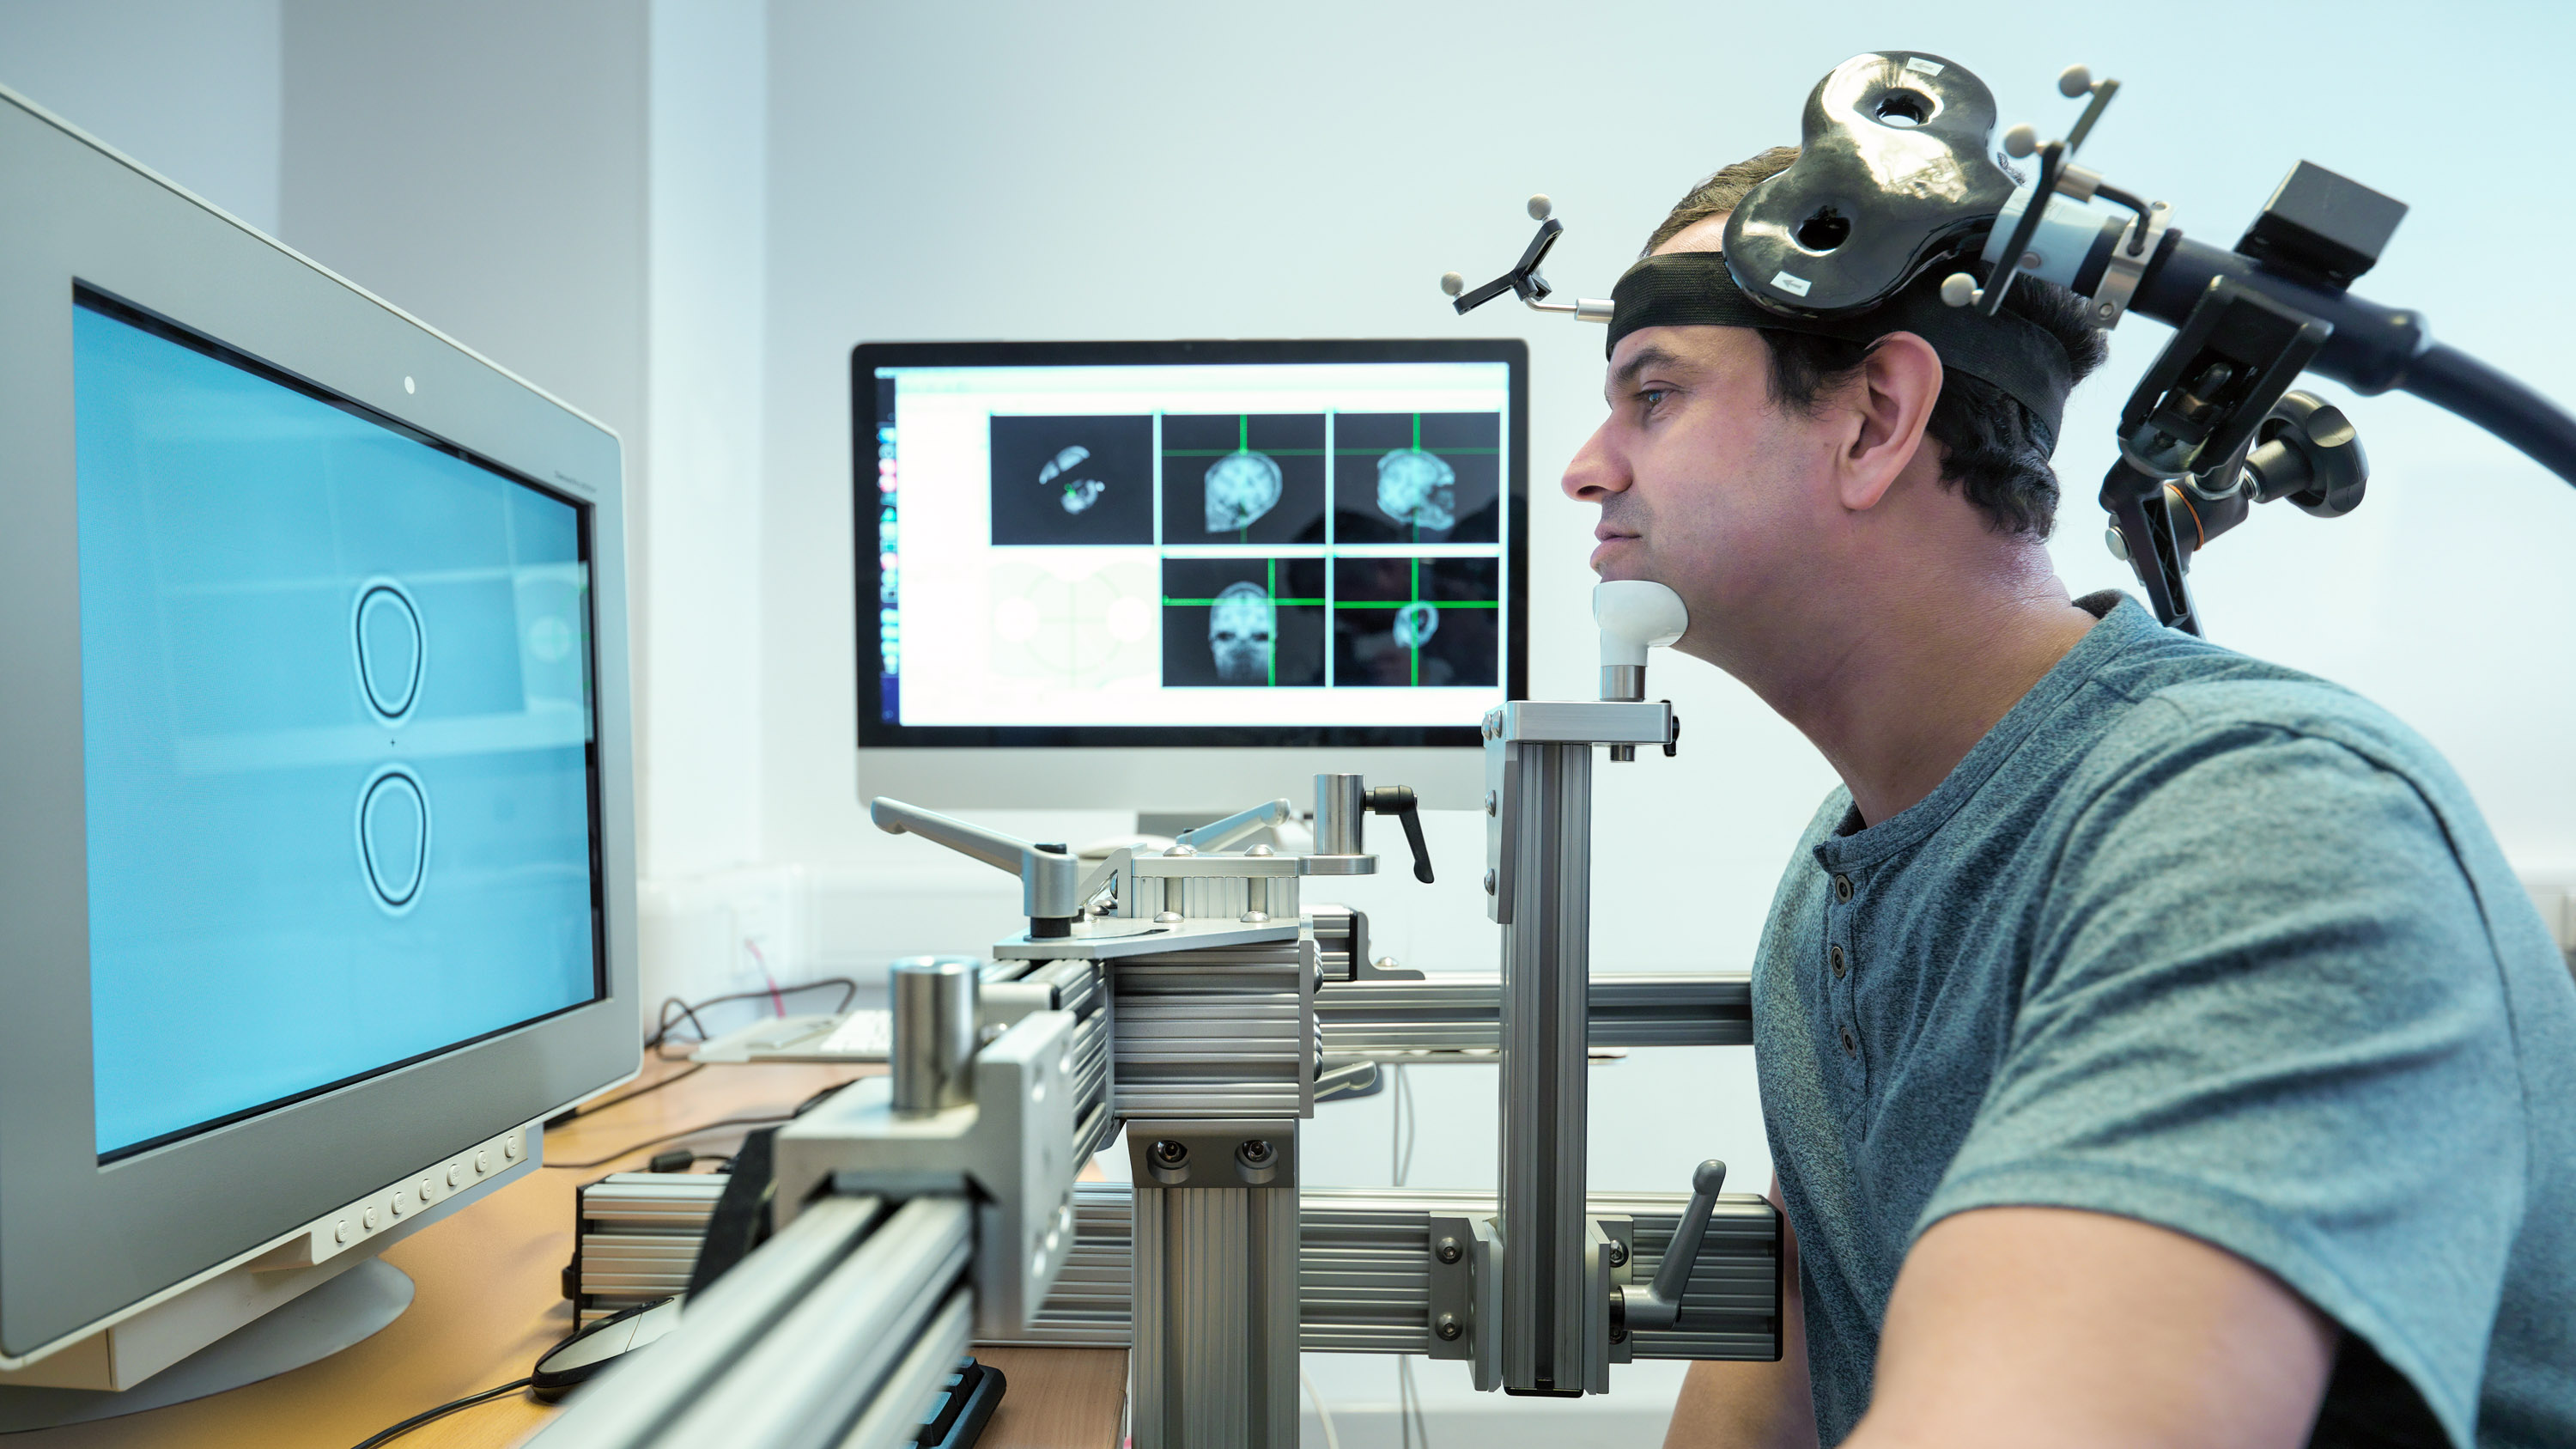 Patient in transcranial magnetic stimulation (TMS) experiment